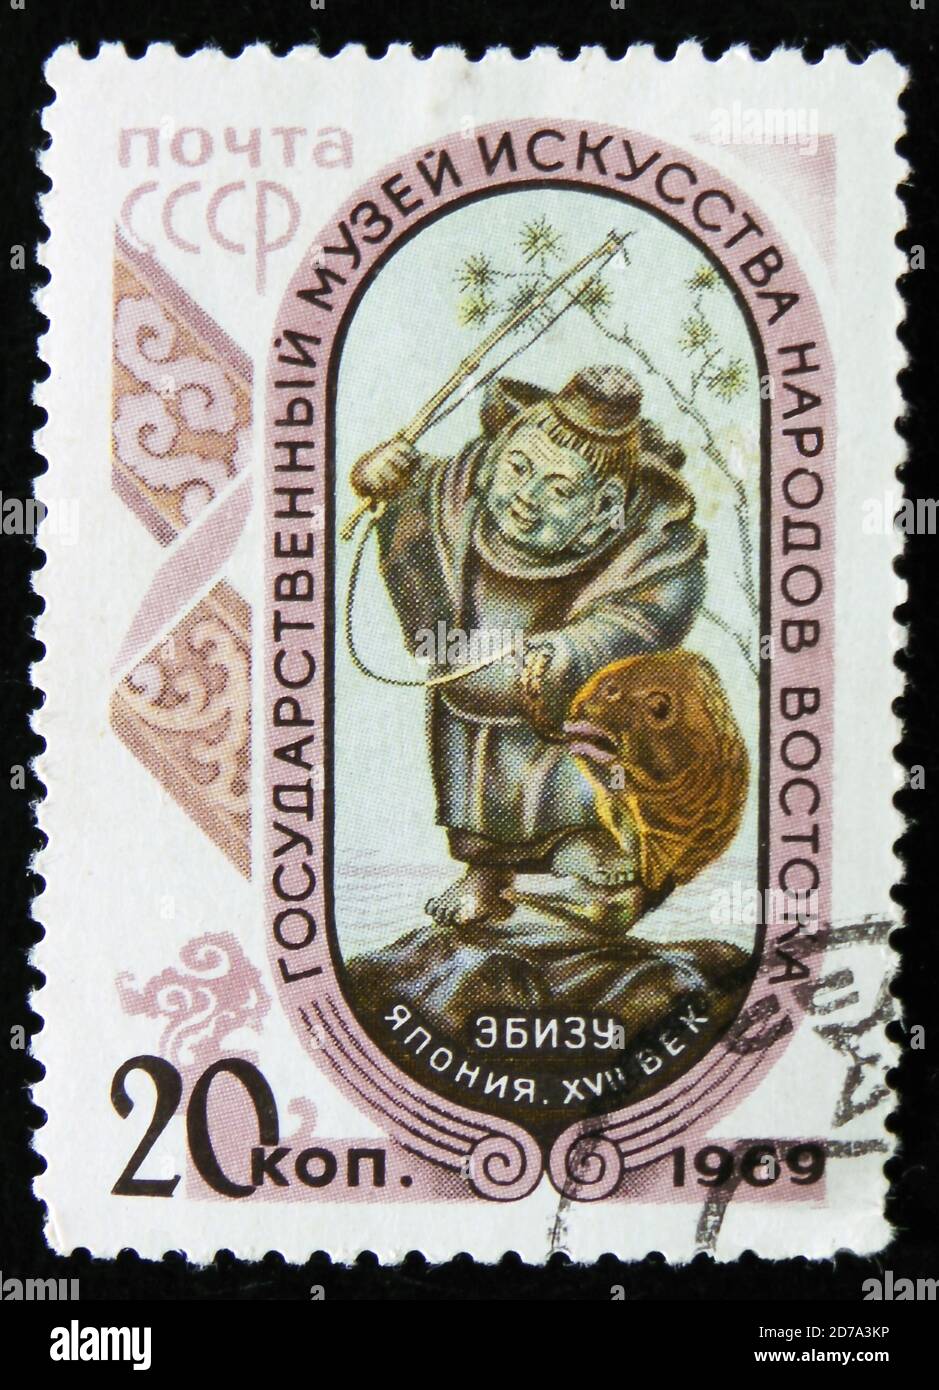 MOSCOW, RUSSIA - APRIL 2, 2017: A post stamp printed in USSR shows sculpture of Ebisu, the Japanese god of fishermen, luck, and workingmen, series Mus Stock Photo